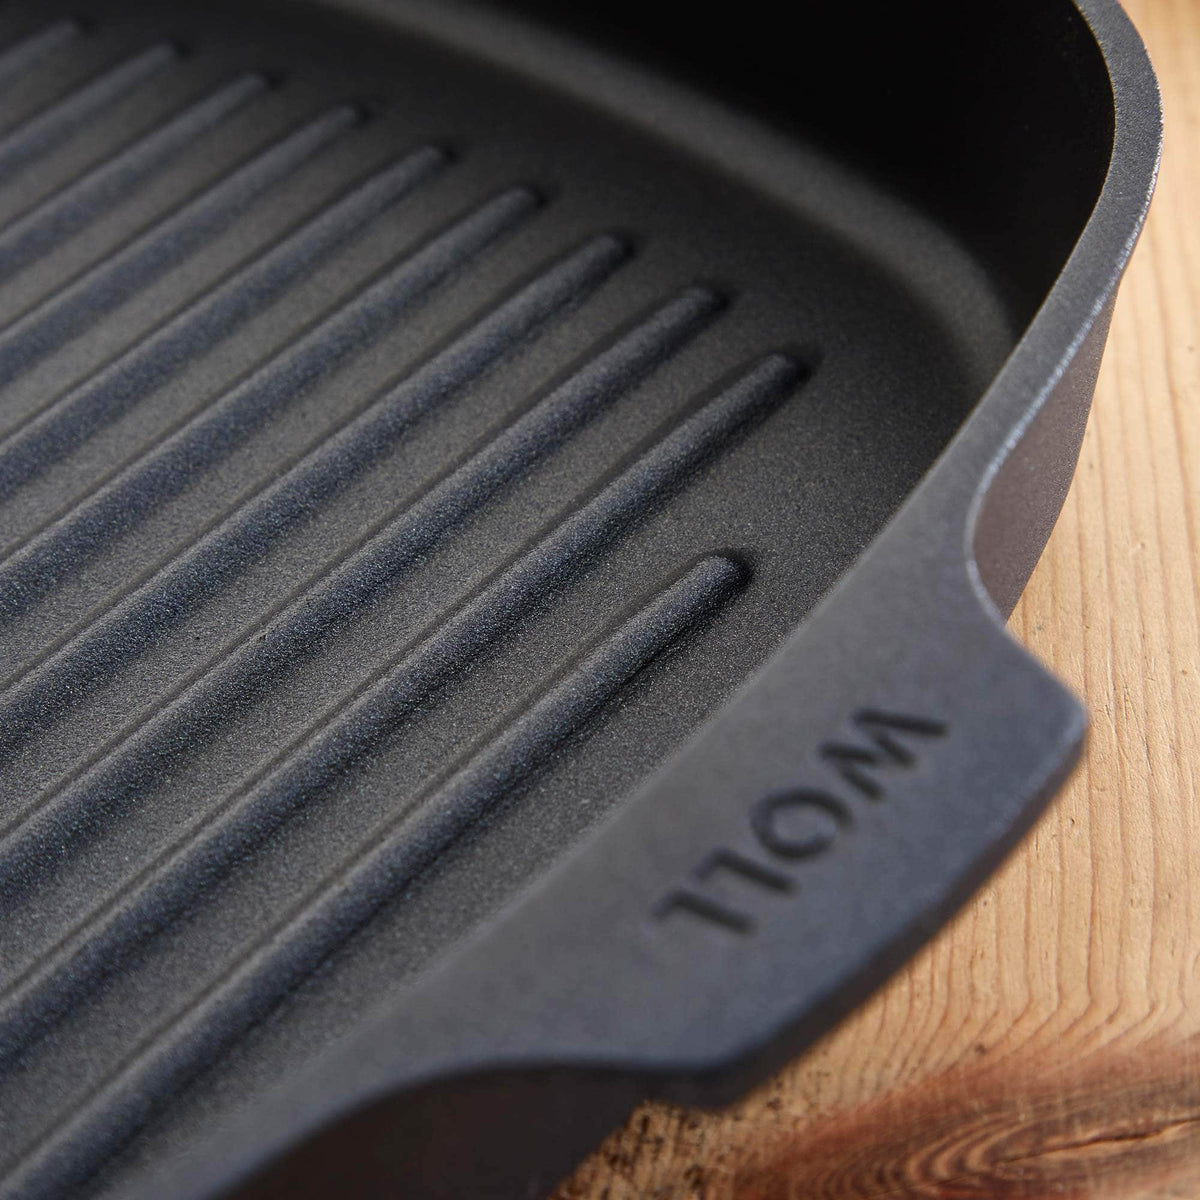 The best griddle pan for use with range cookers. Oven &amp; dishwasher safe!